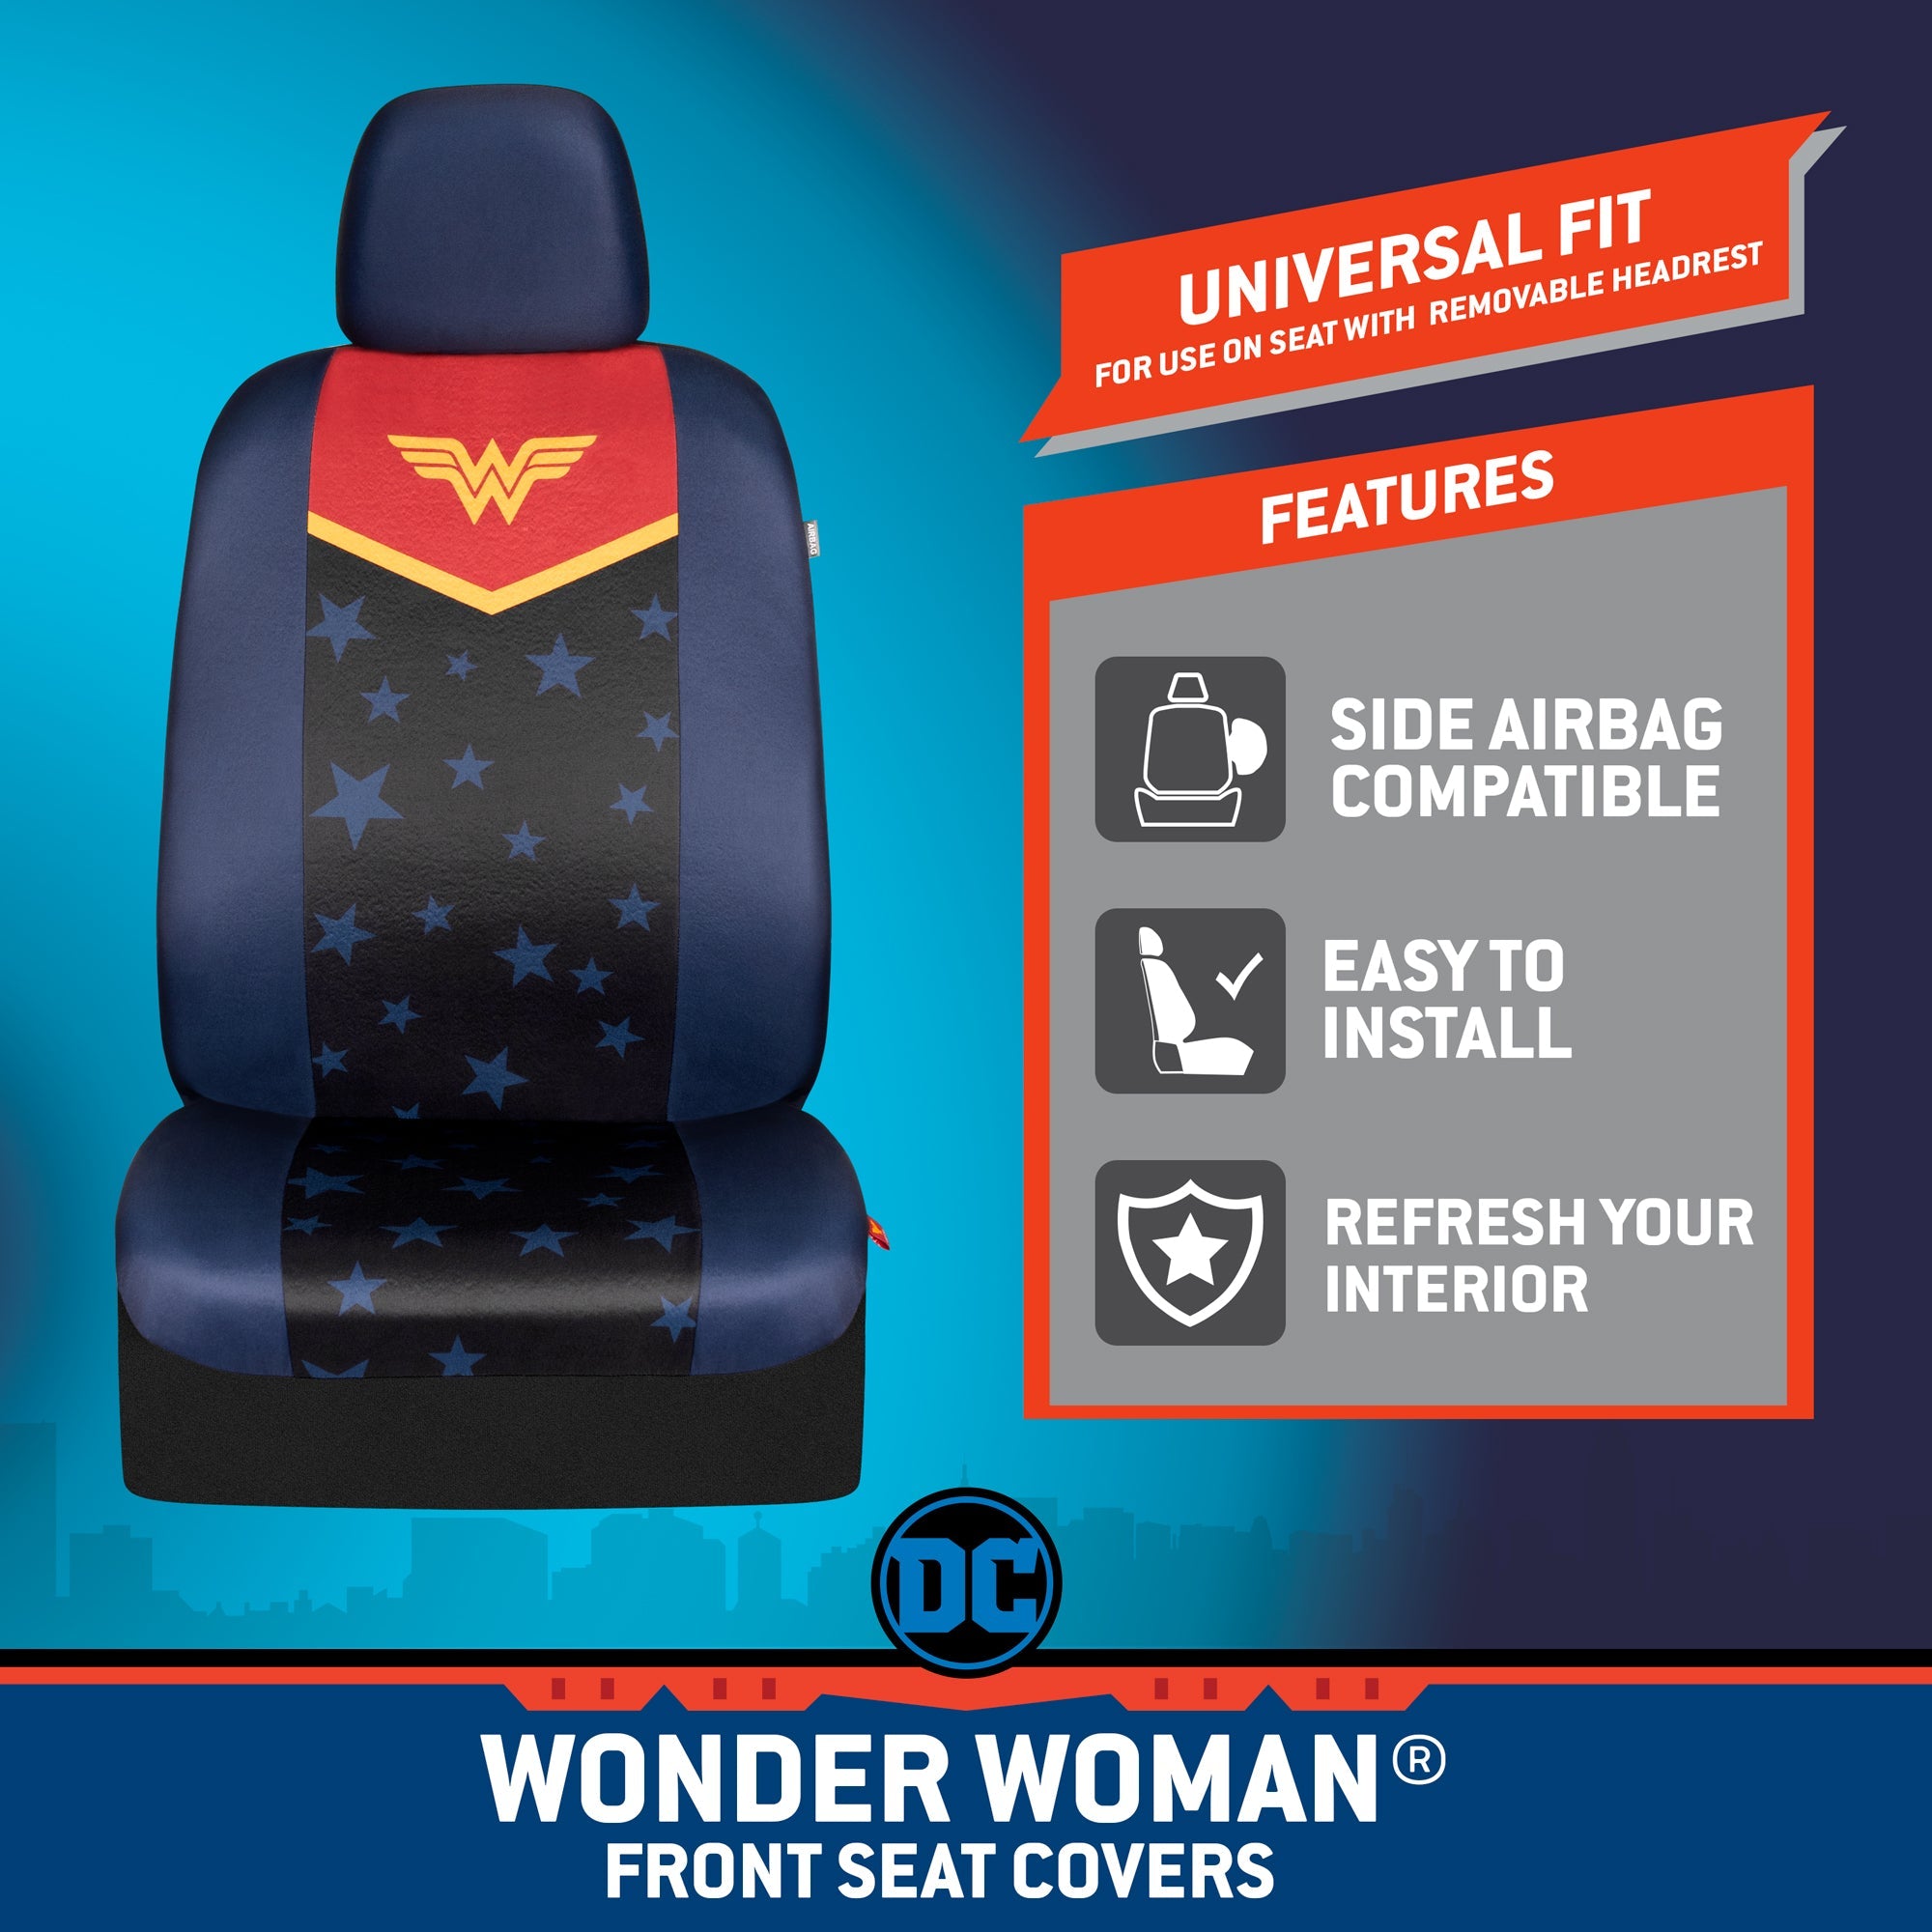 Wonder Woman Car Seat Covers - 100% Waterproof Front Pair Blue Stars on Black with Red/Yellow Logo - Side Airbag Safe Protection for Car SUV Van Truck